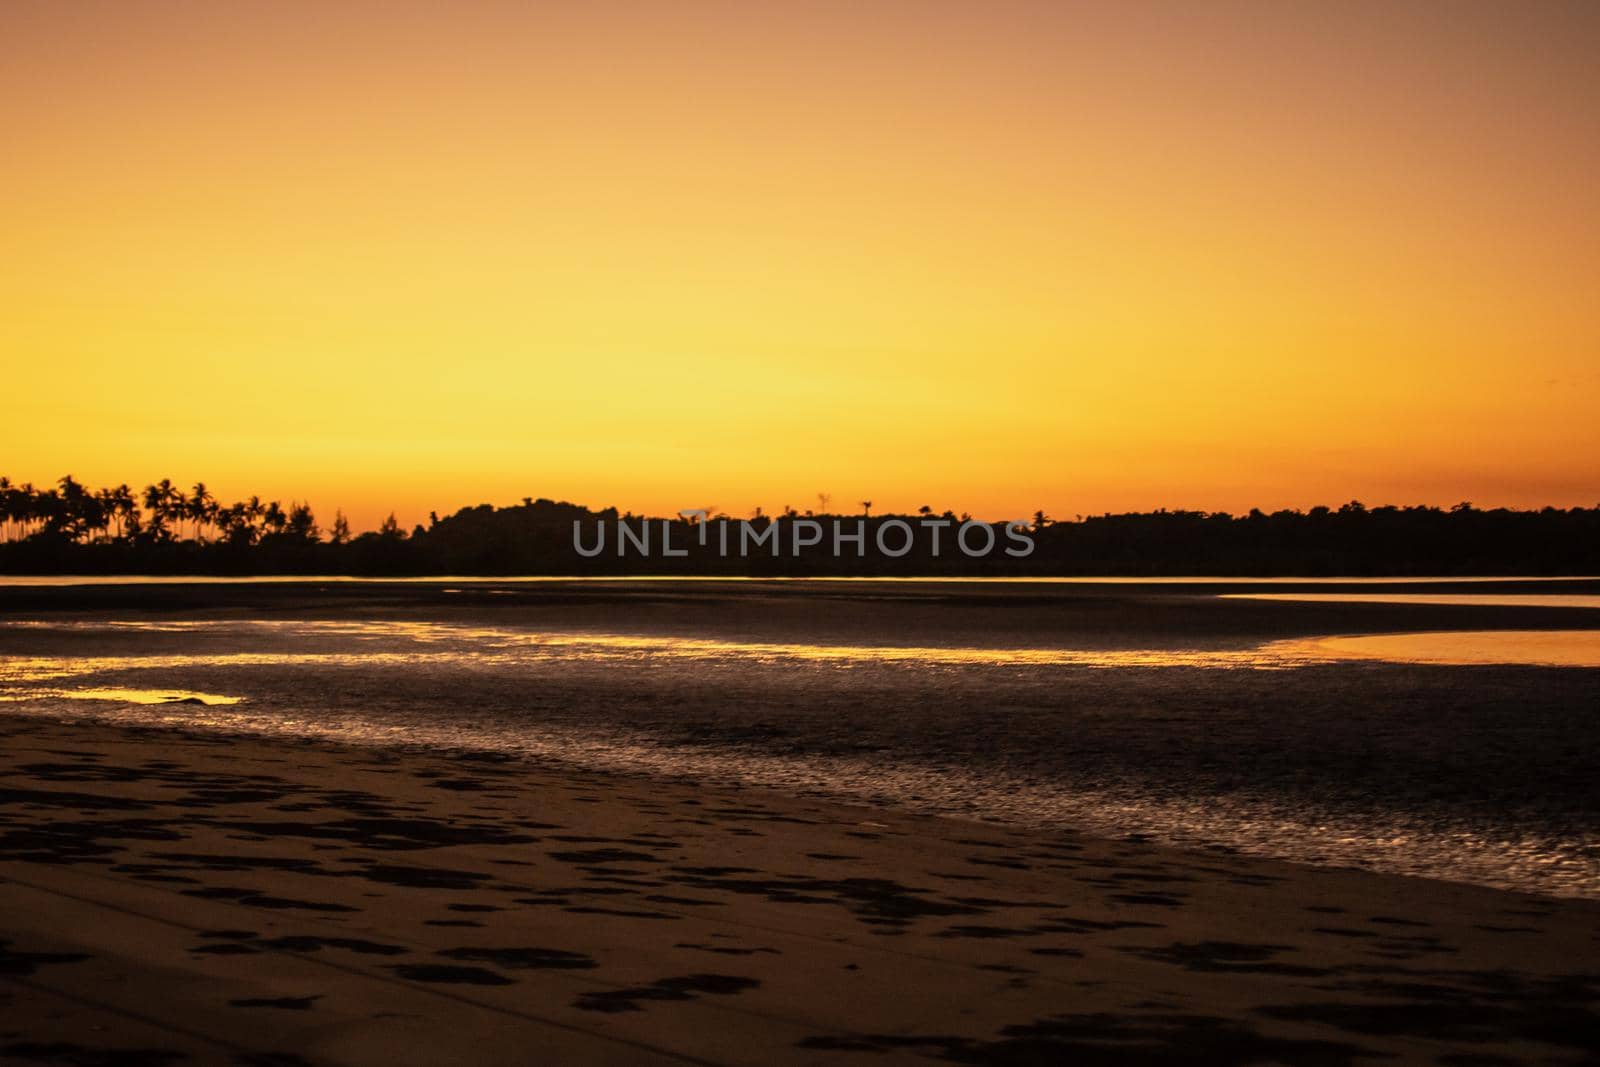 A sand beach during low tide and a bright orange sunset, peace and quiet, near Ngwesaung, Irrawaddy, western Myanmar